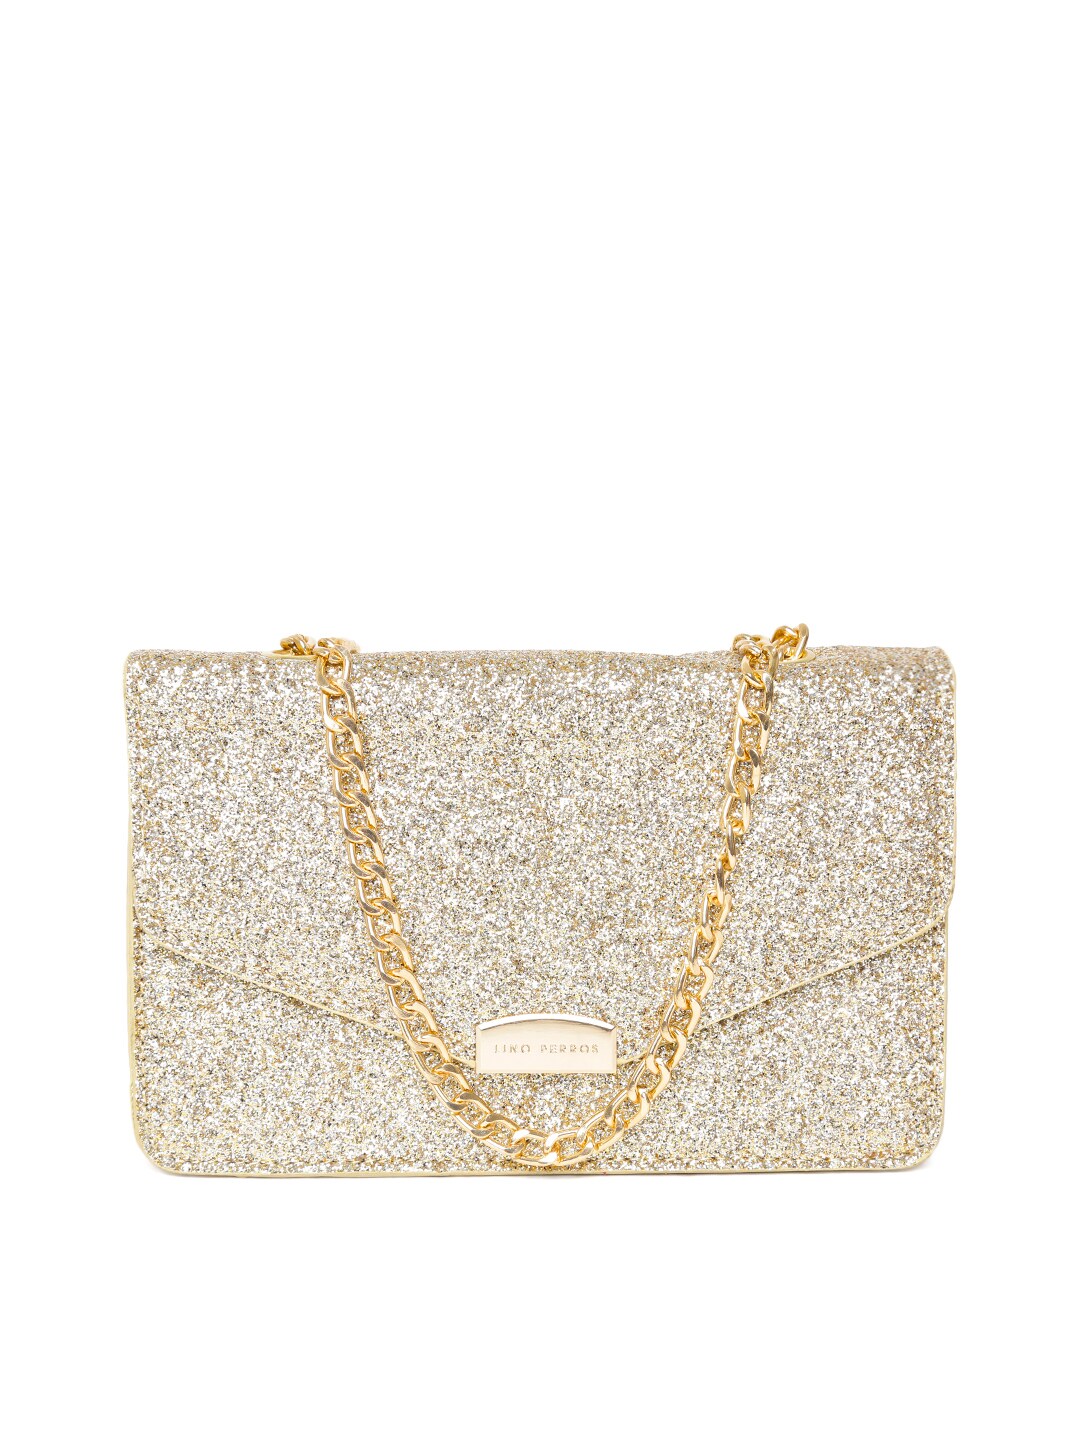 Lino Perros Gold-Toned Shimmery Sling Bag Price in India